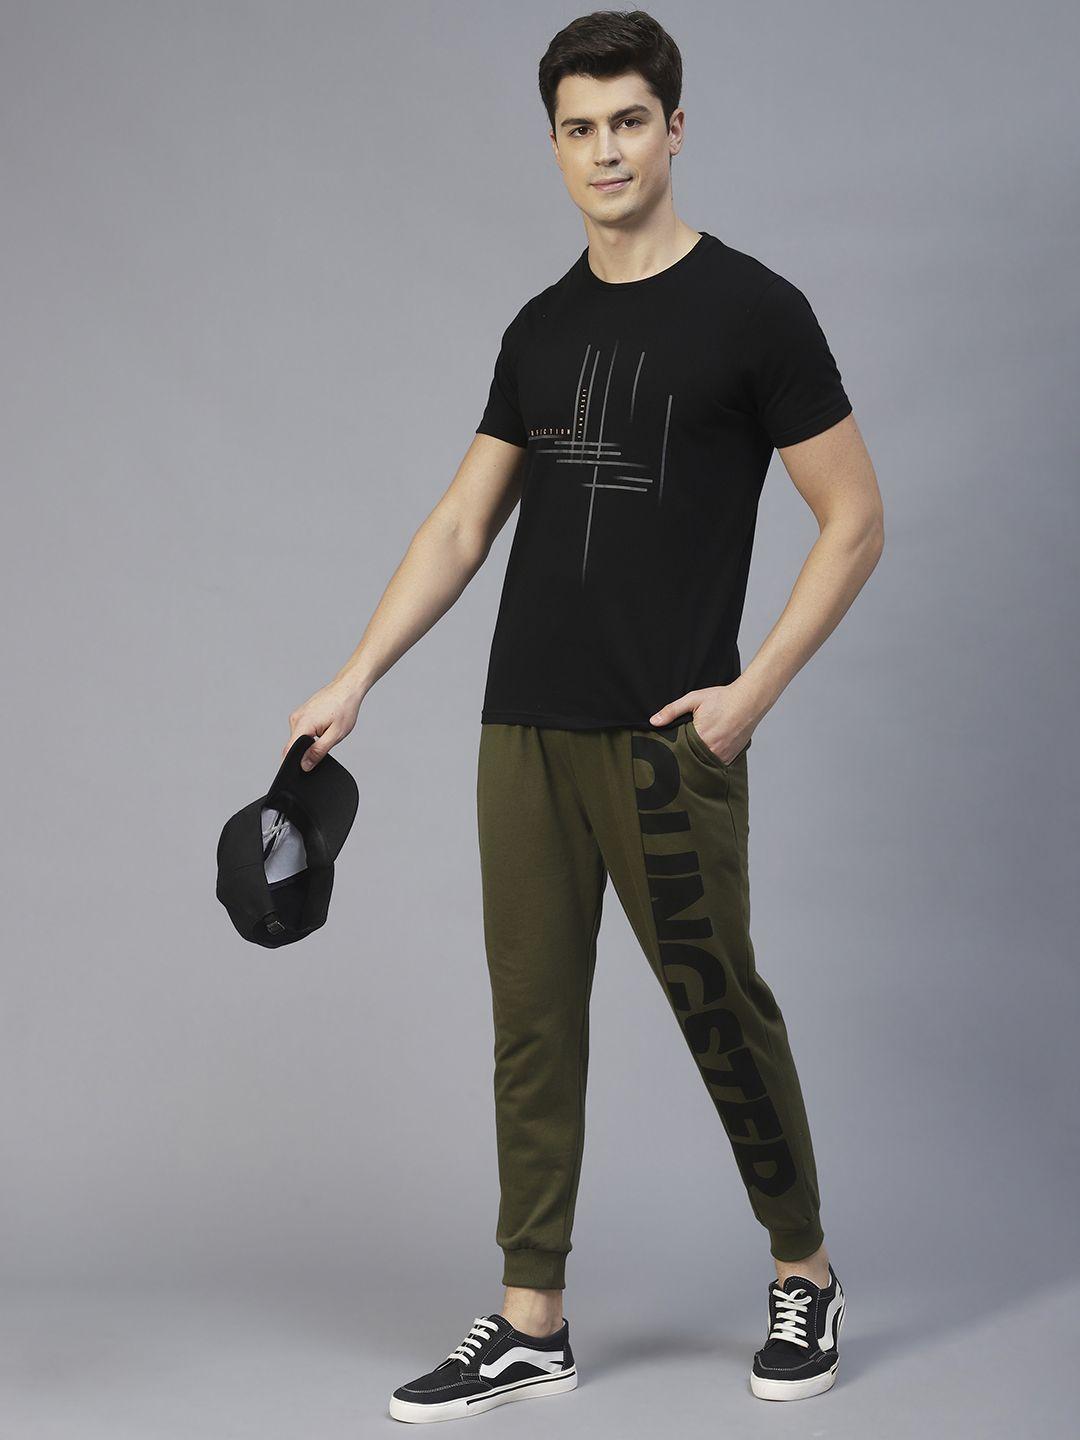 rigo-army-men-olive-green-cotton-one-side-printed-sports-jogger